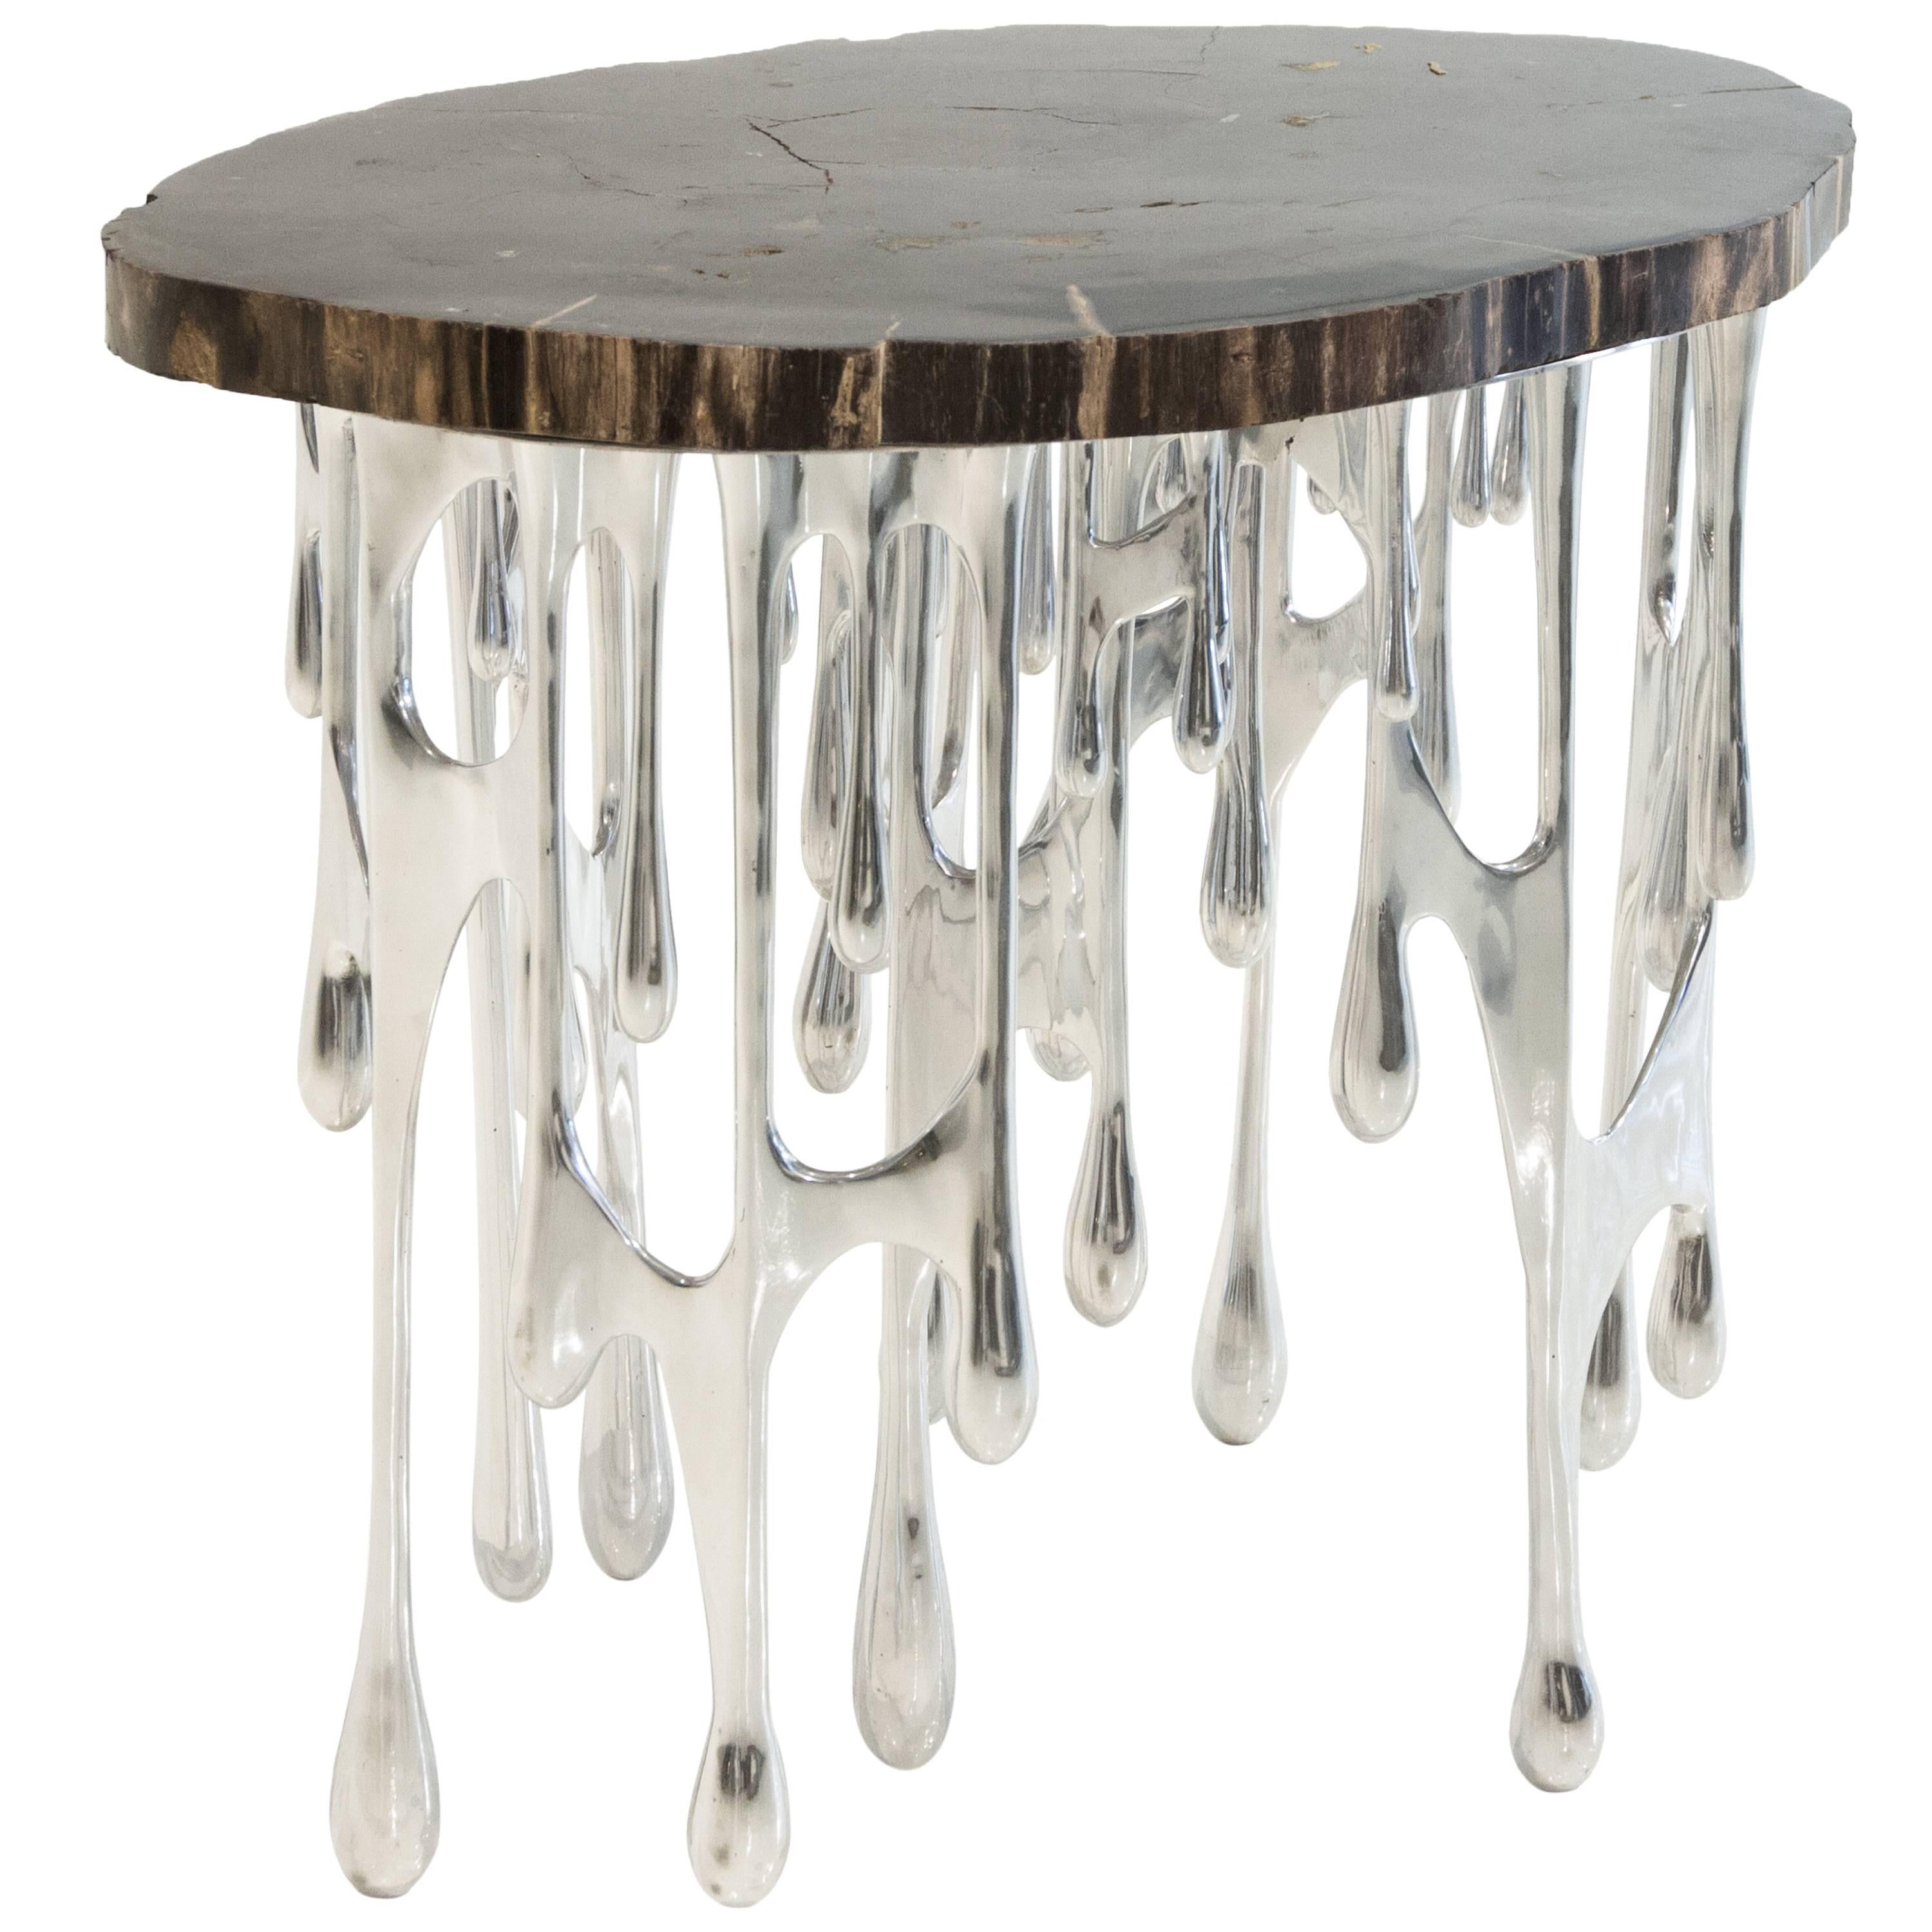 The Dripping Table